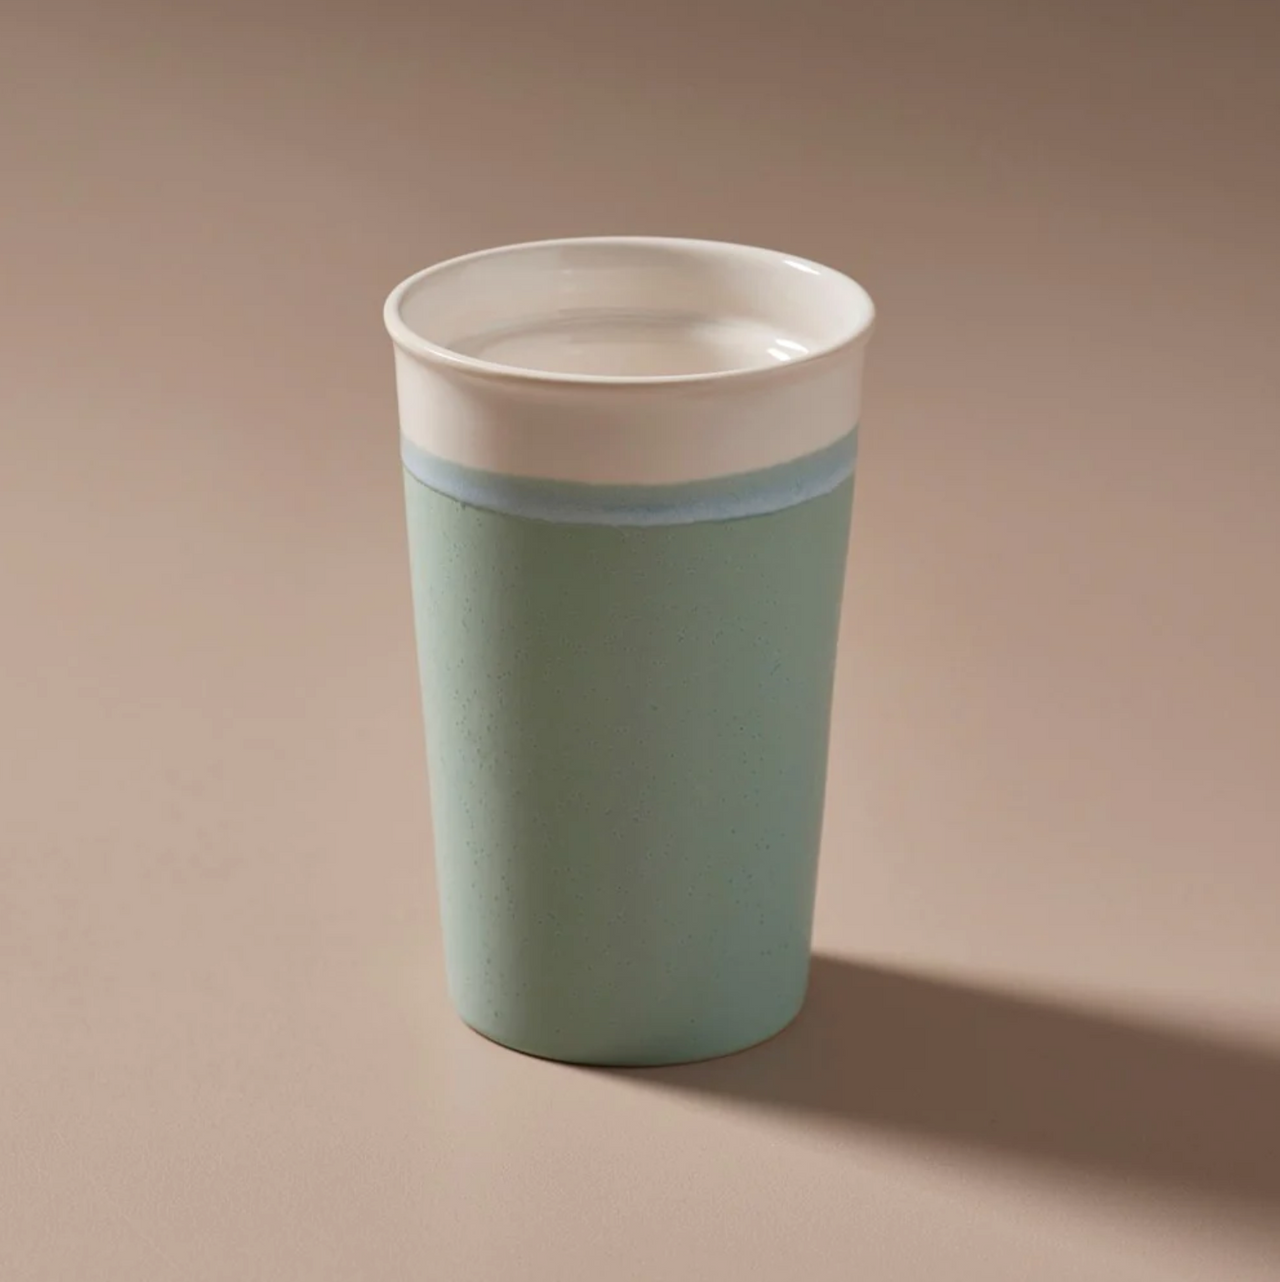 An Indigo Love Keeper Cup - Ceramic - Marine, designed to save the planet.